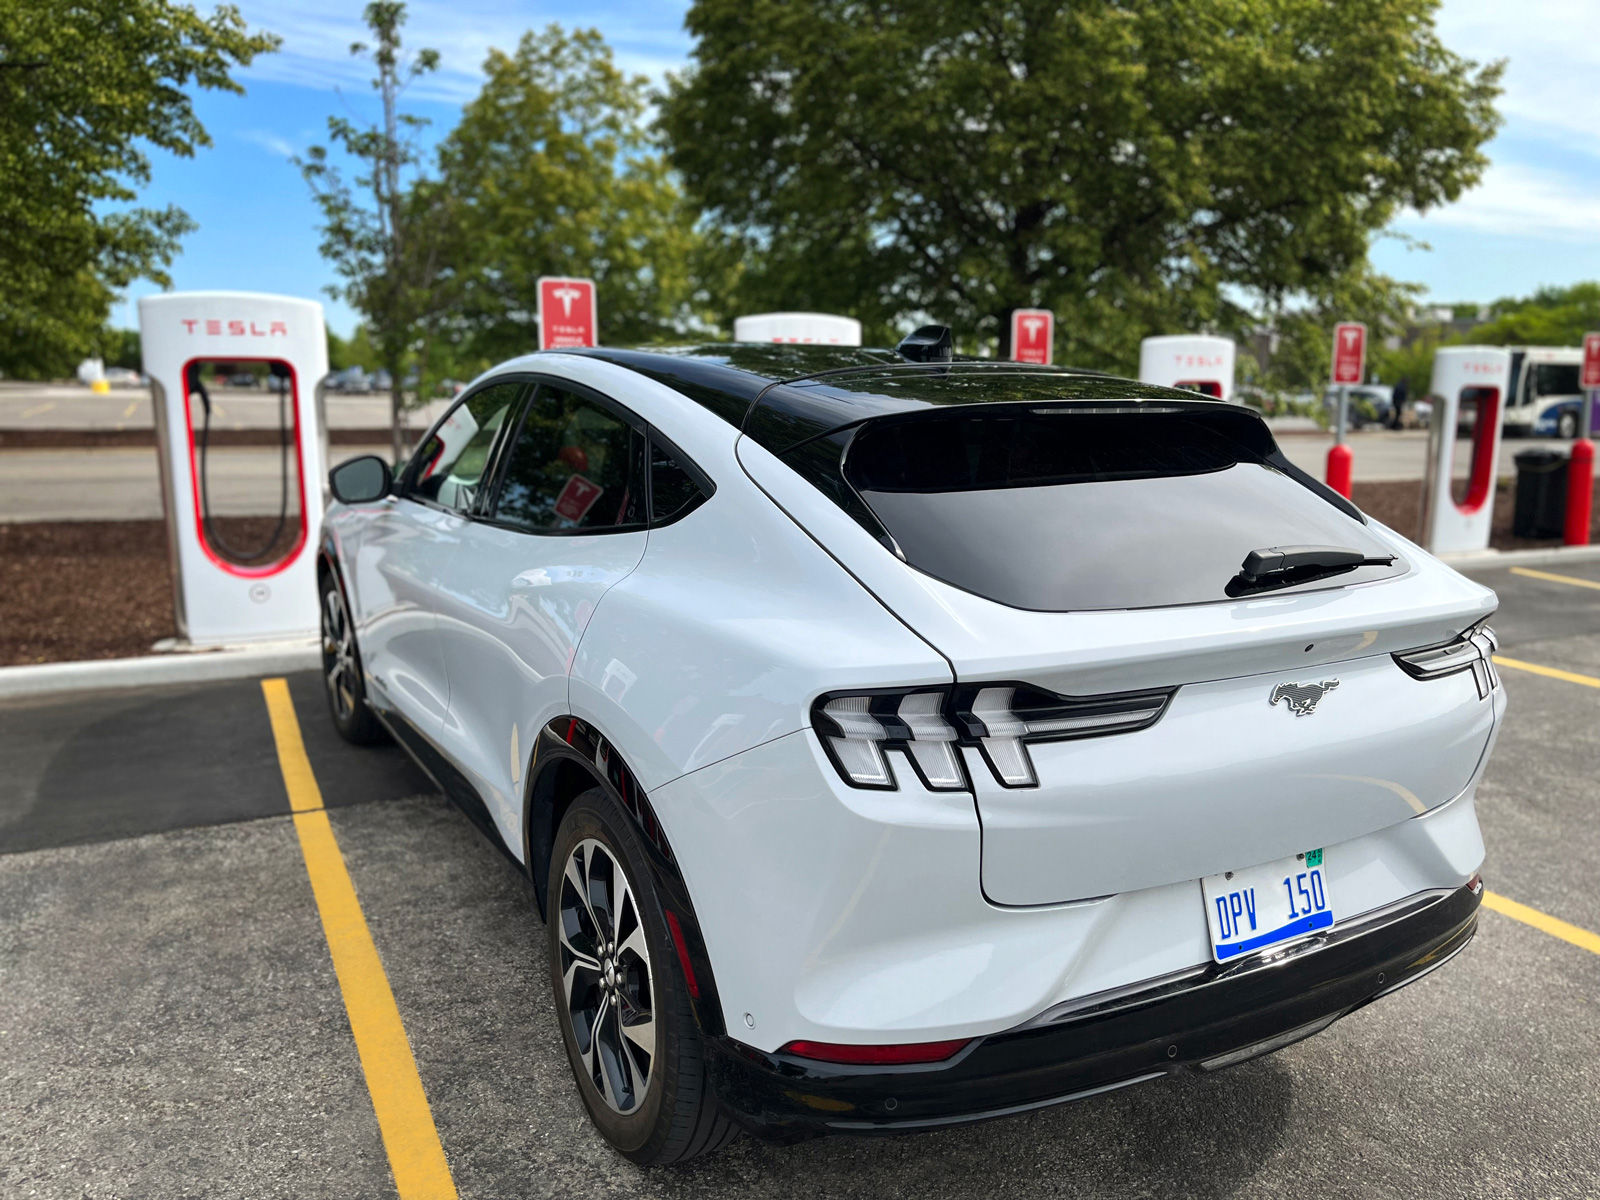 Ford Mustang Mach-E at Tesla Supercharger station